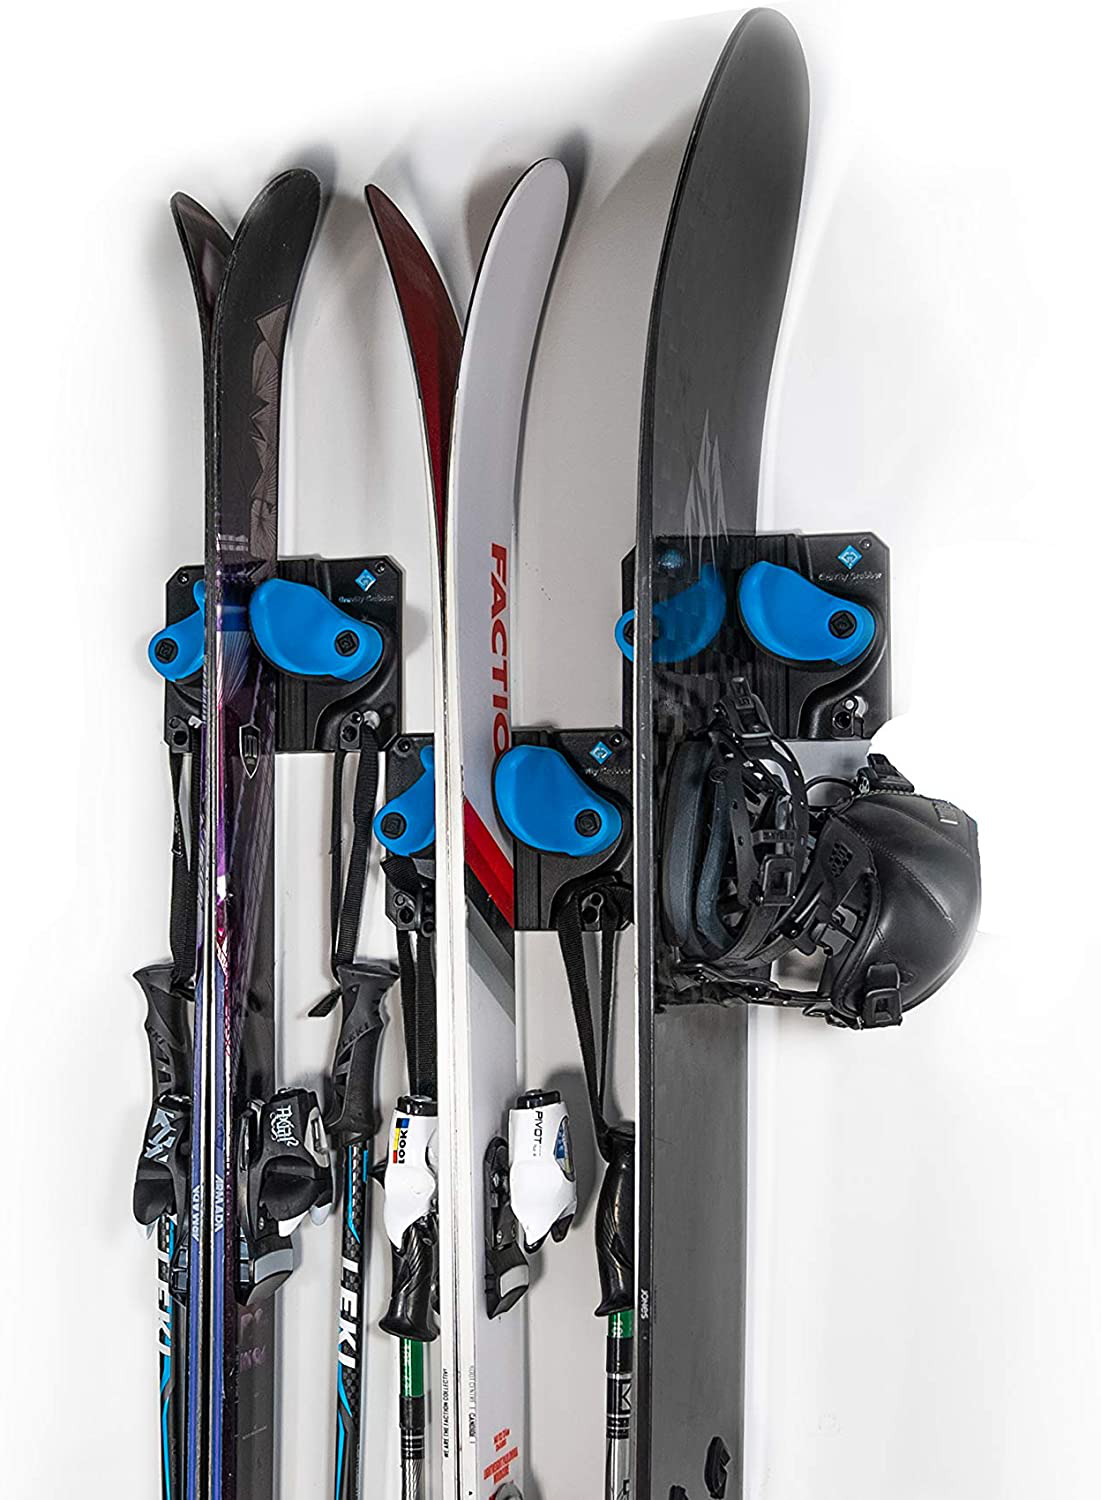 thinkstar Easy In And Out Snowboard Wall Storage Rack Fits Any Ski Or Snowboard, Plastic